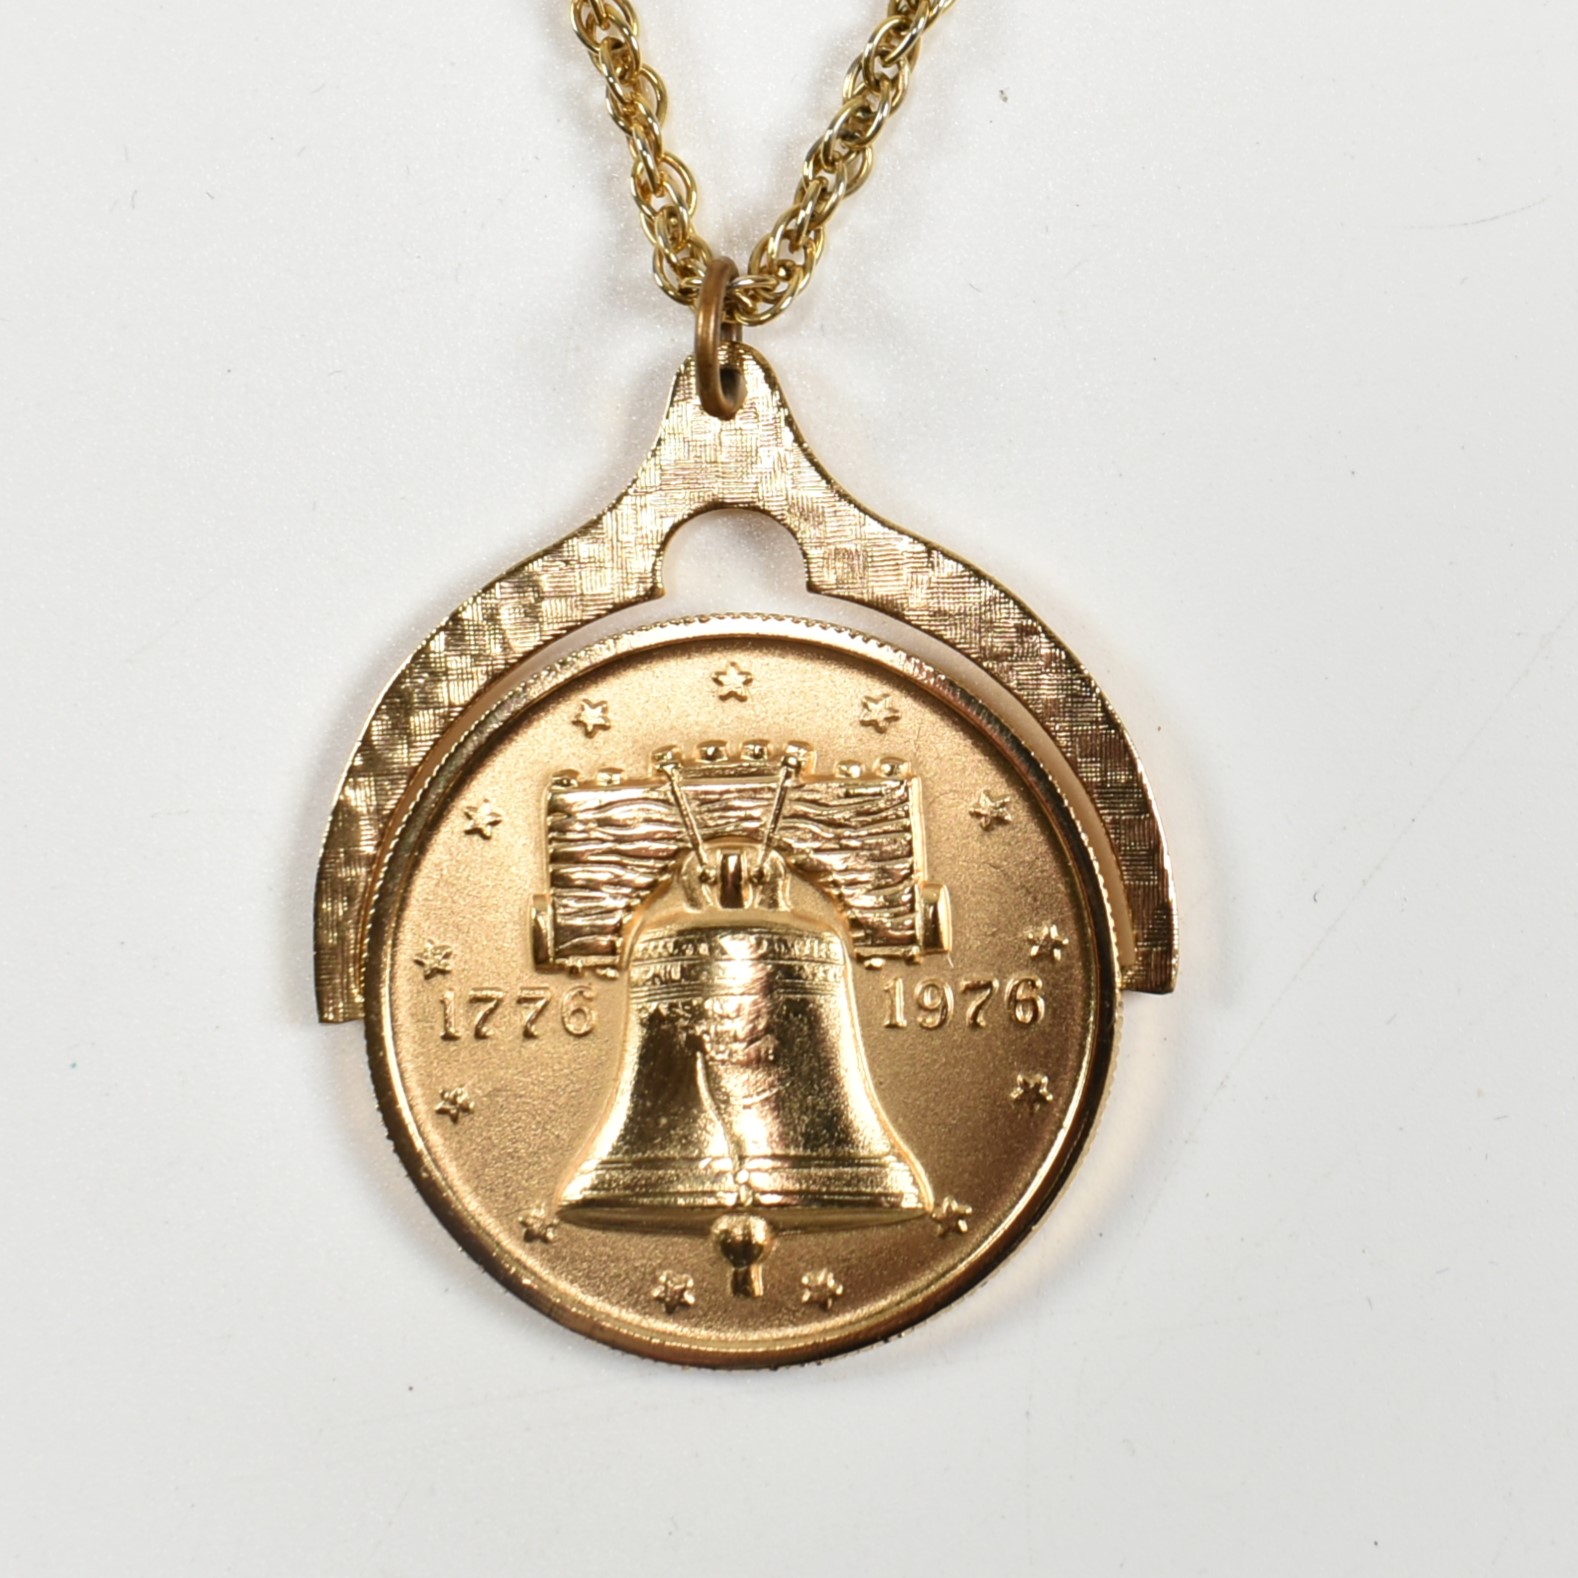 DA VINCI LIBERTY BELL PENDANT NECKLACE & GOLD PLATED NECKLACES - Image 7 of 7